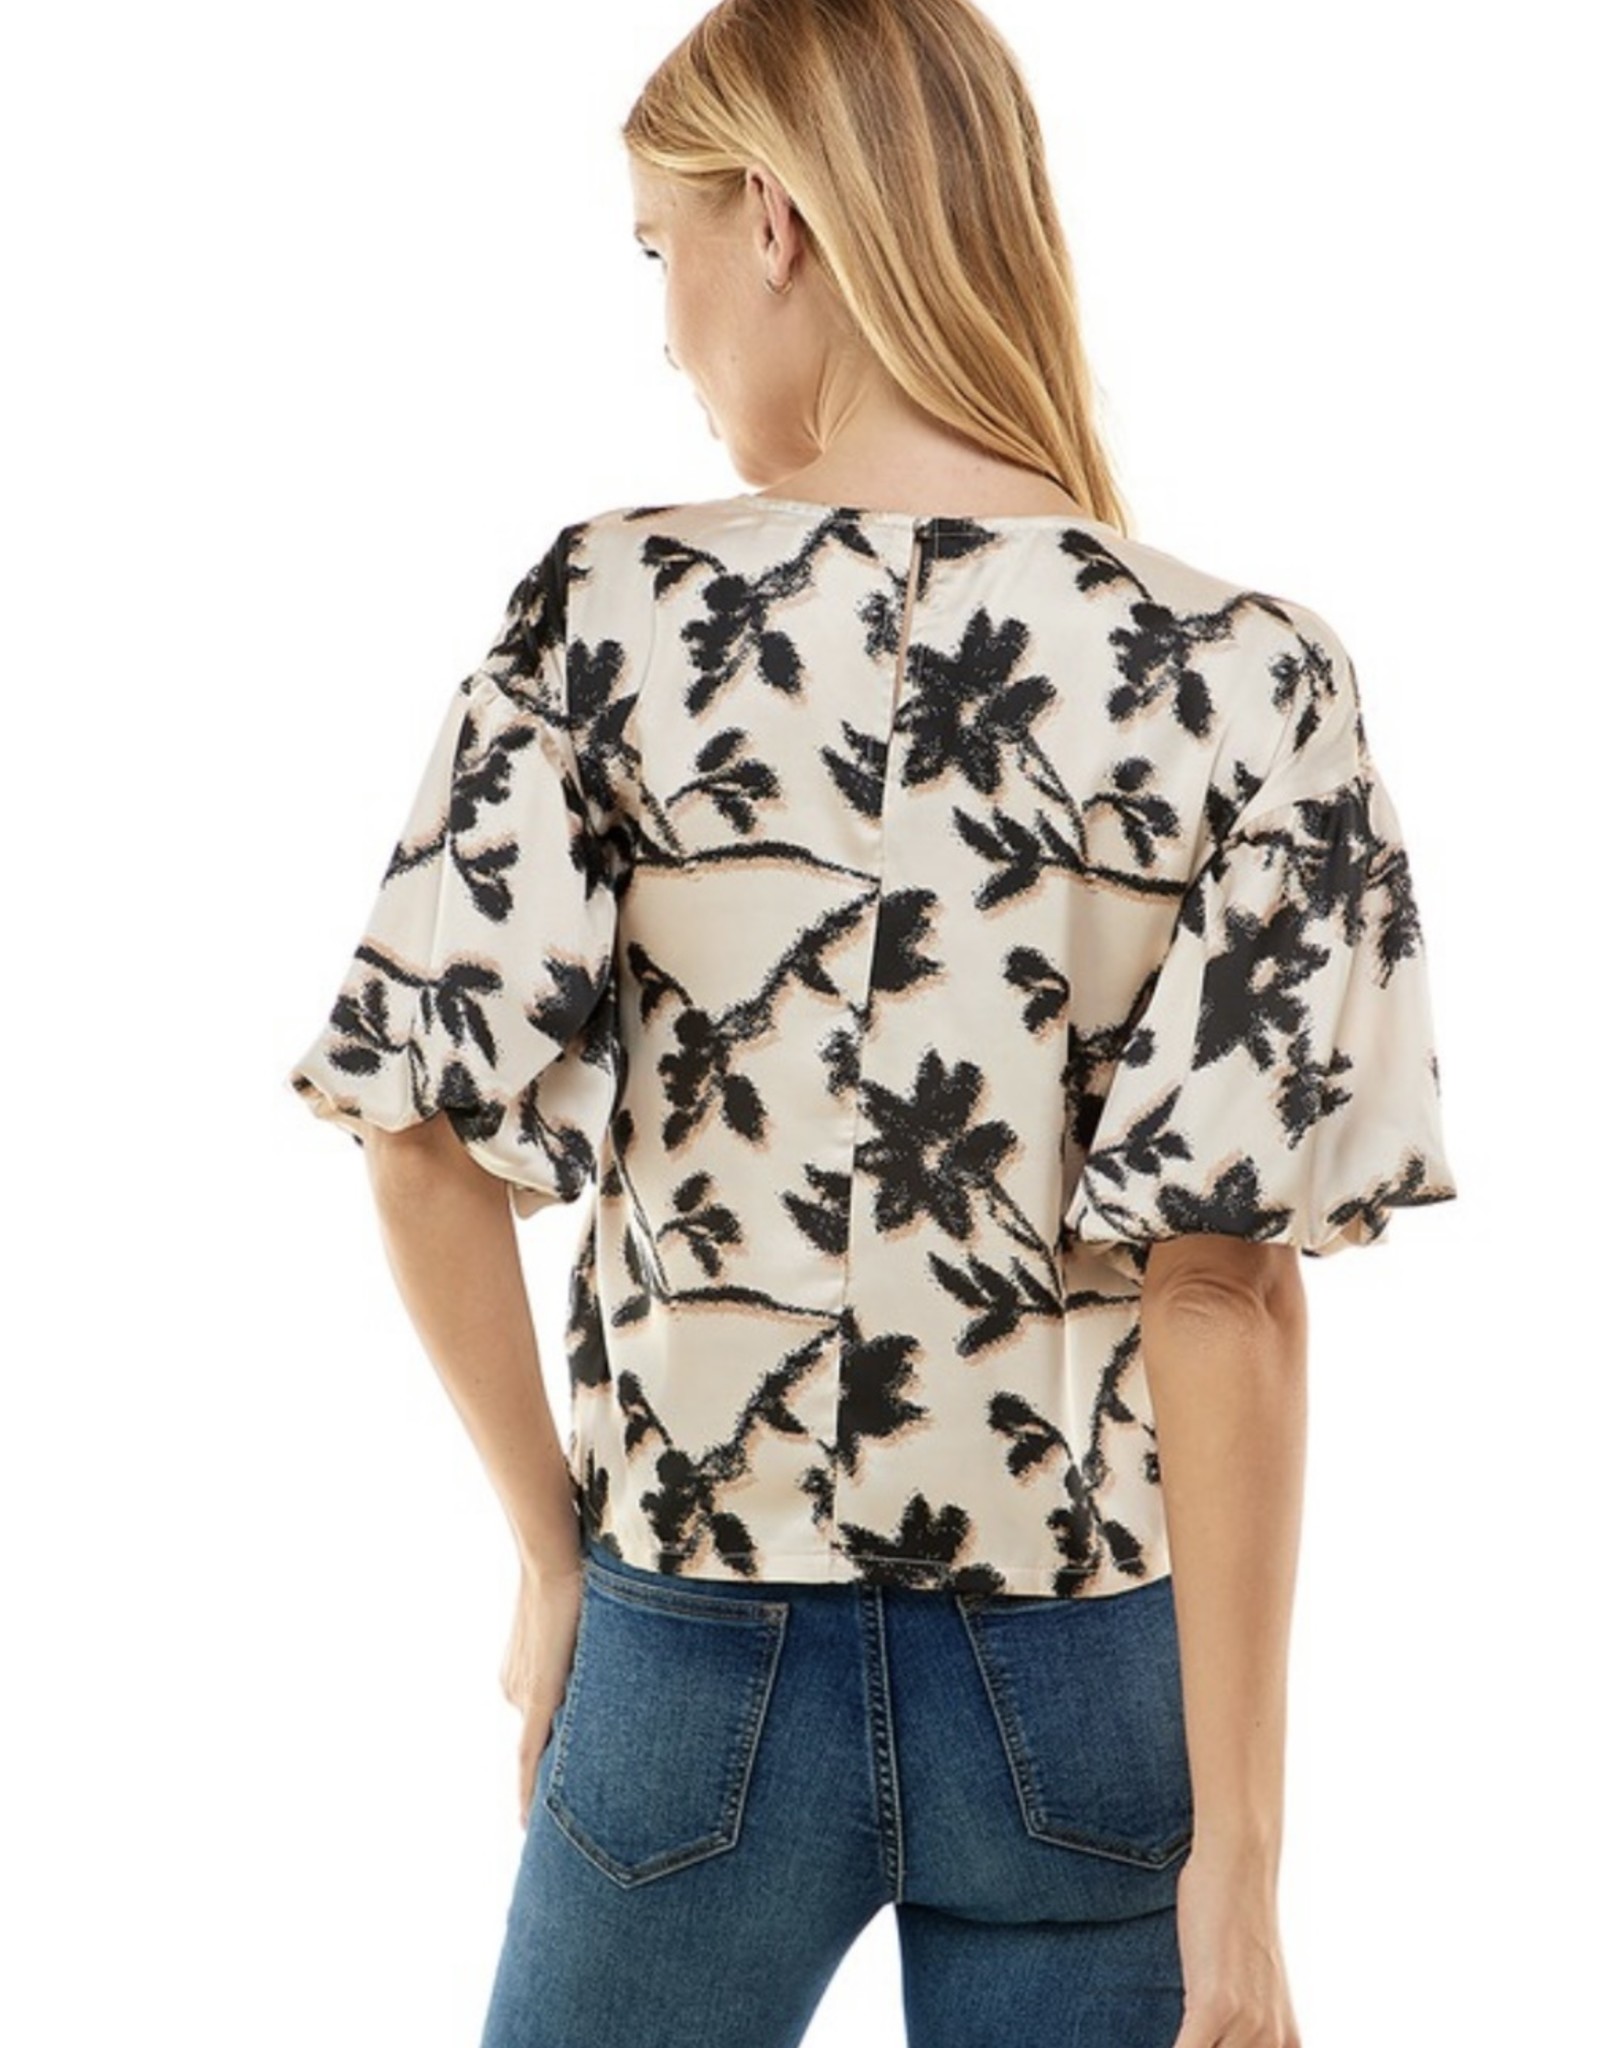 Cream and Black Floral Print Blouse